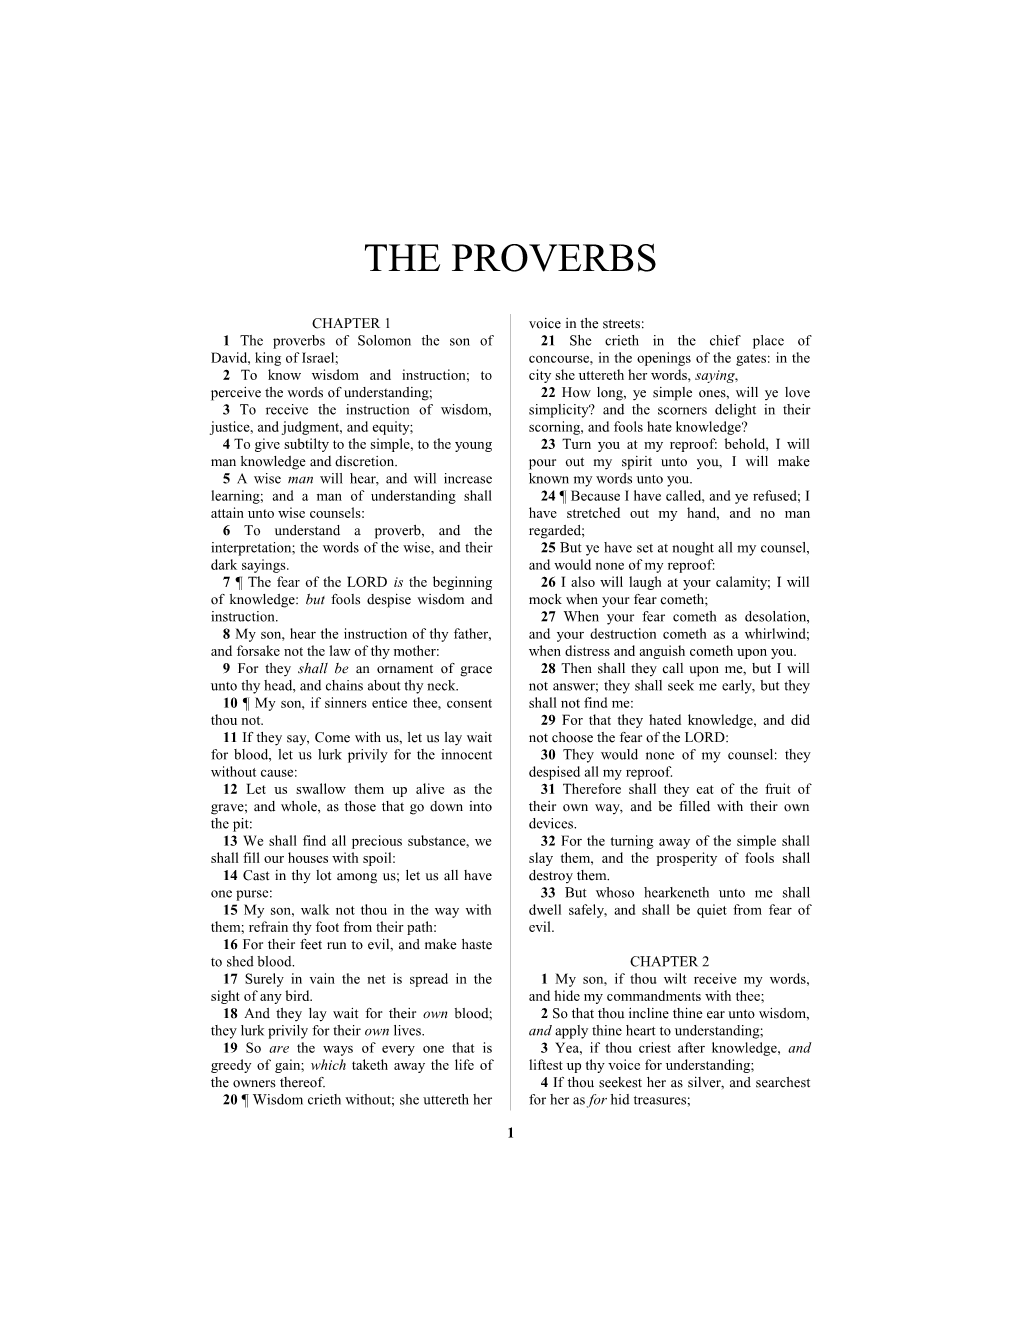 1 the Proverbs of Solomon the Son of David, King of Israel;